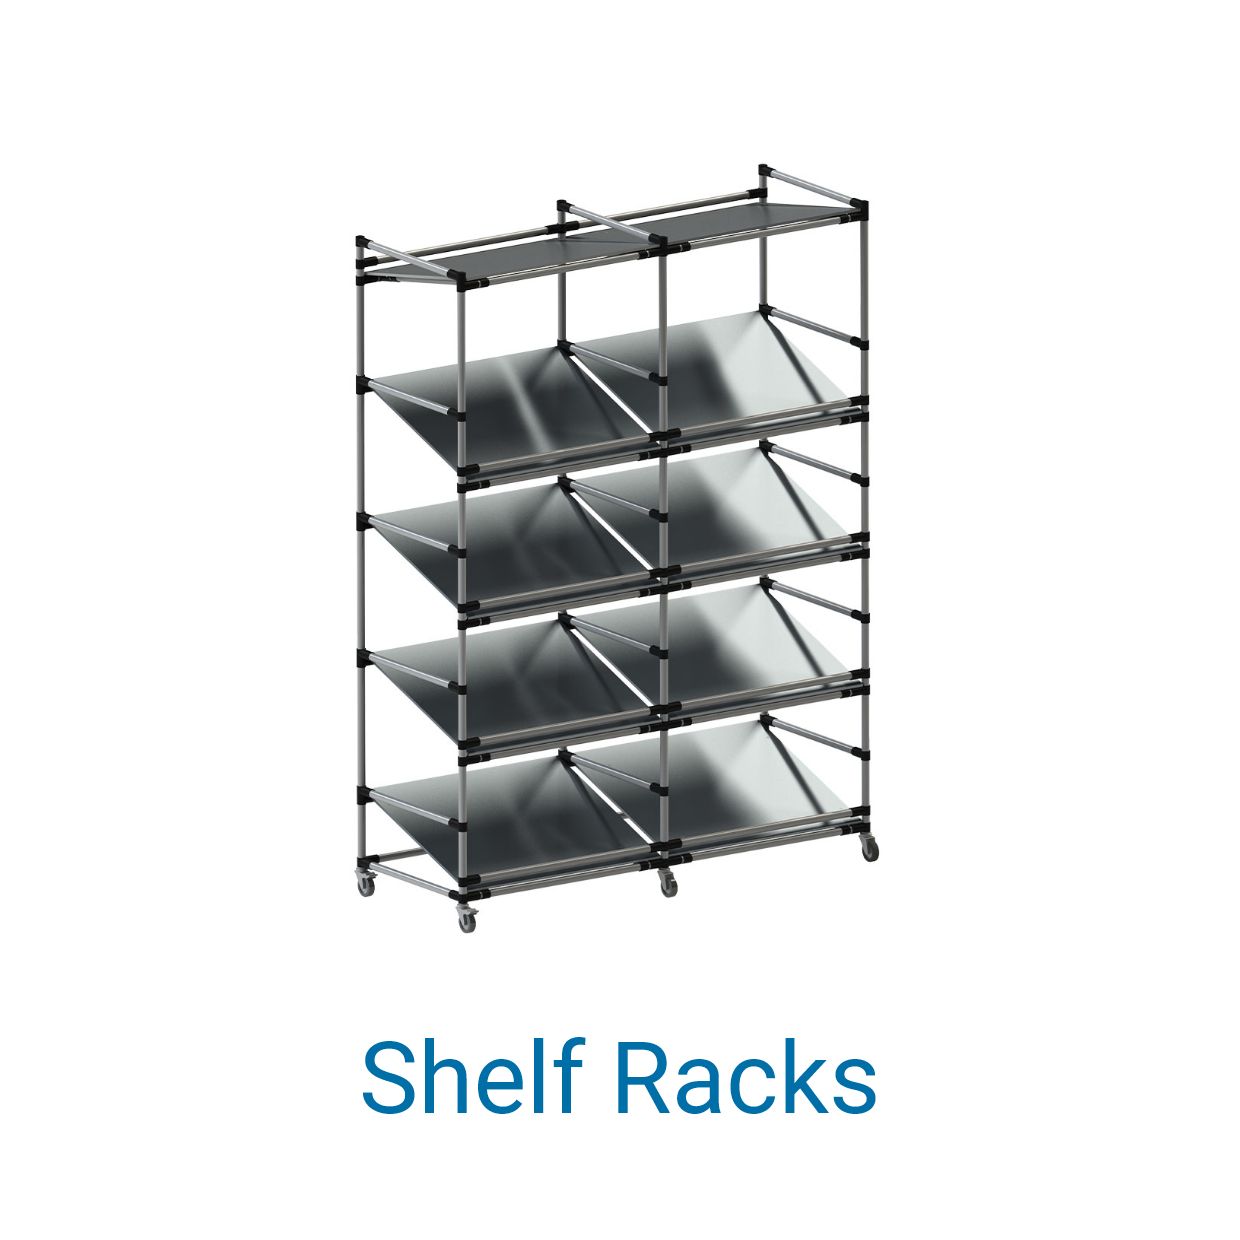 Rendering of a shelf rack from BeeWaTec 